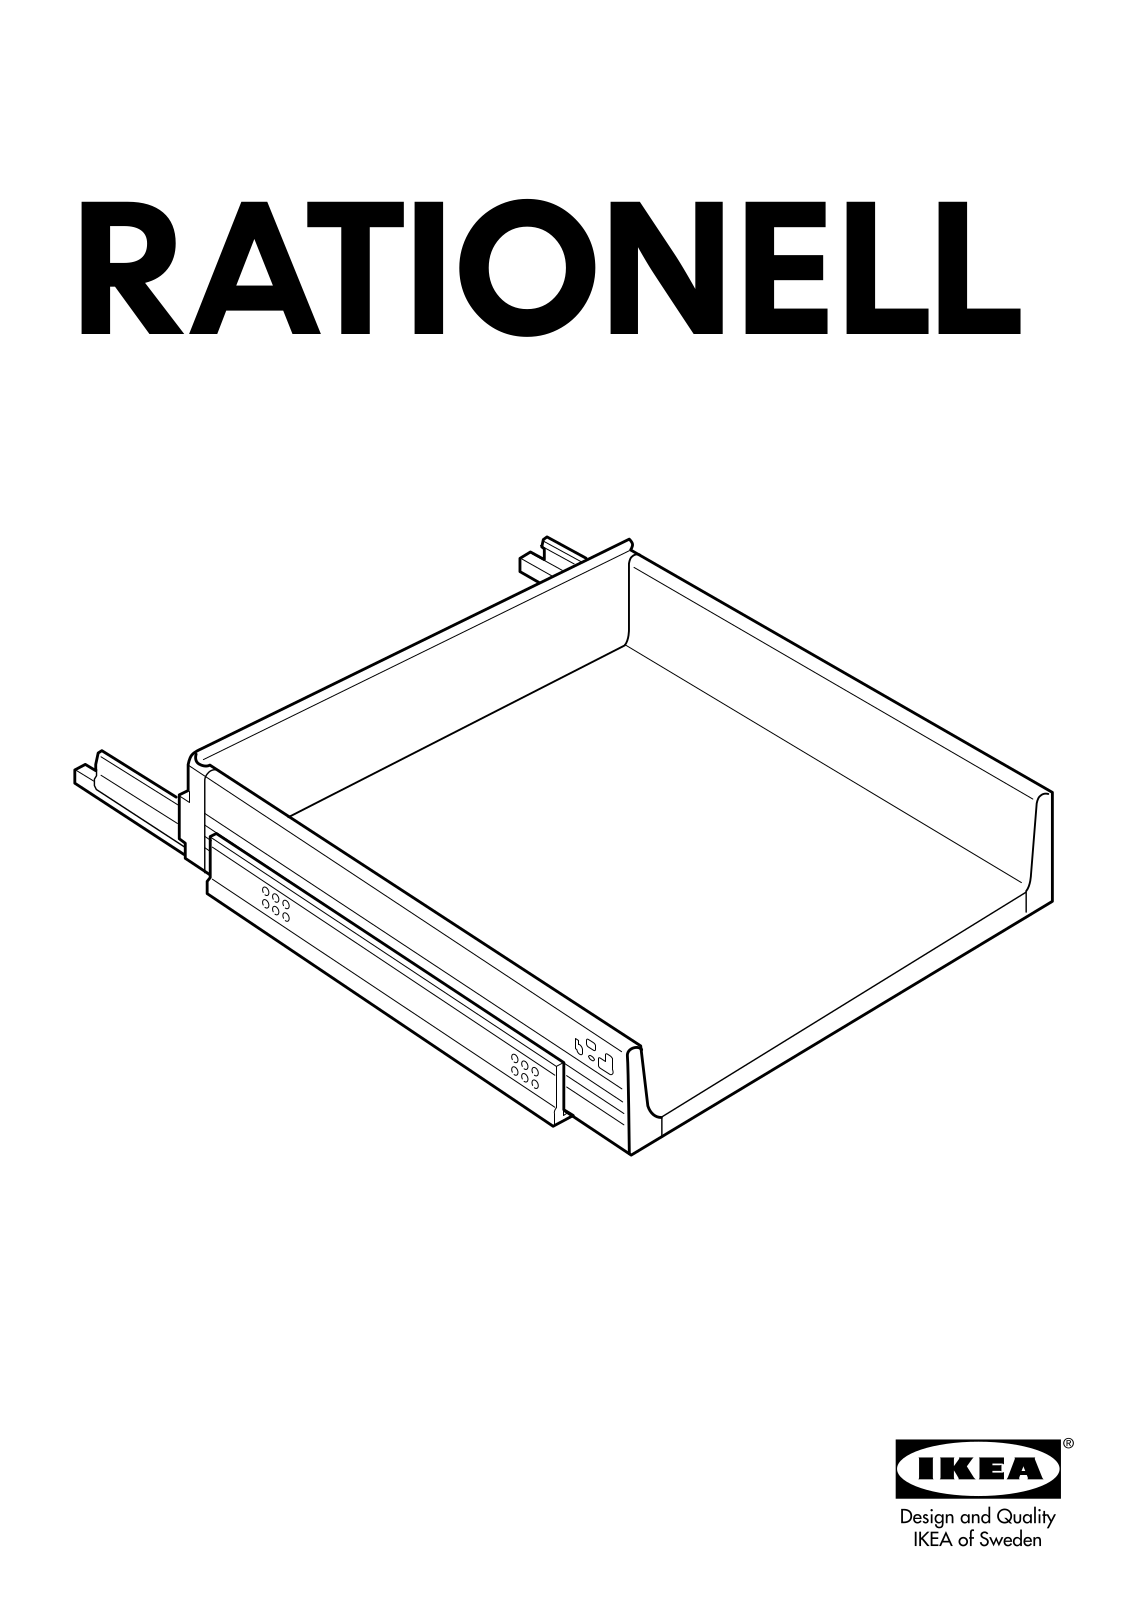 IKEA RATIONELL FULL EXTENDING DRAWER 15 Assembly Instruction